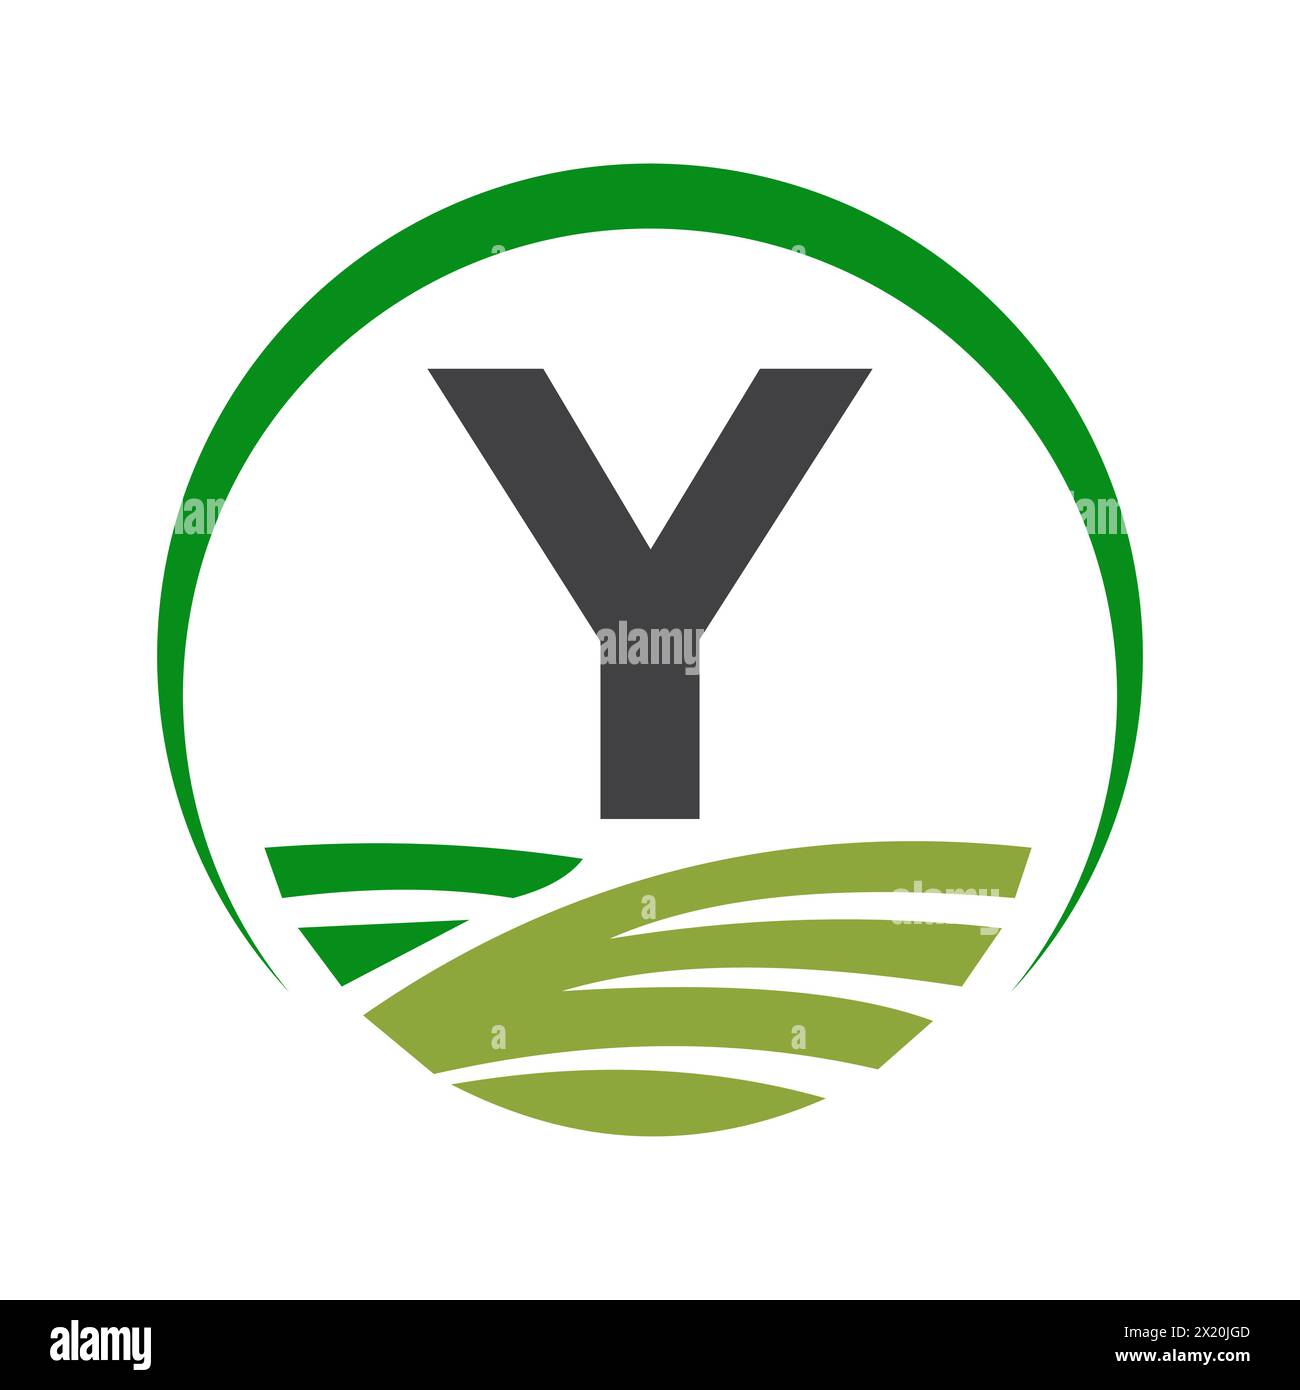 Agriculture Logo On Letter Y Concept For Farming Symbol Stock Vector